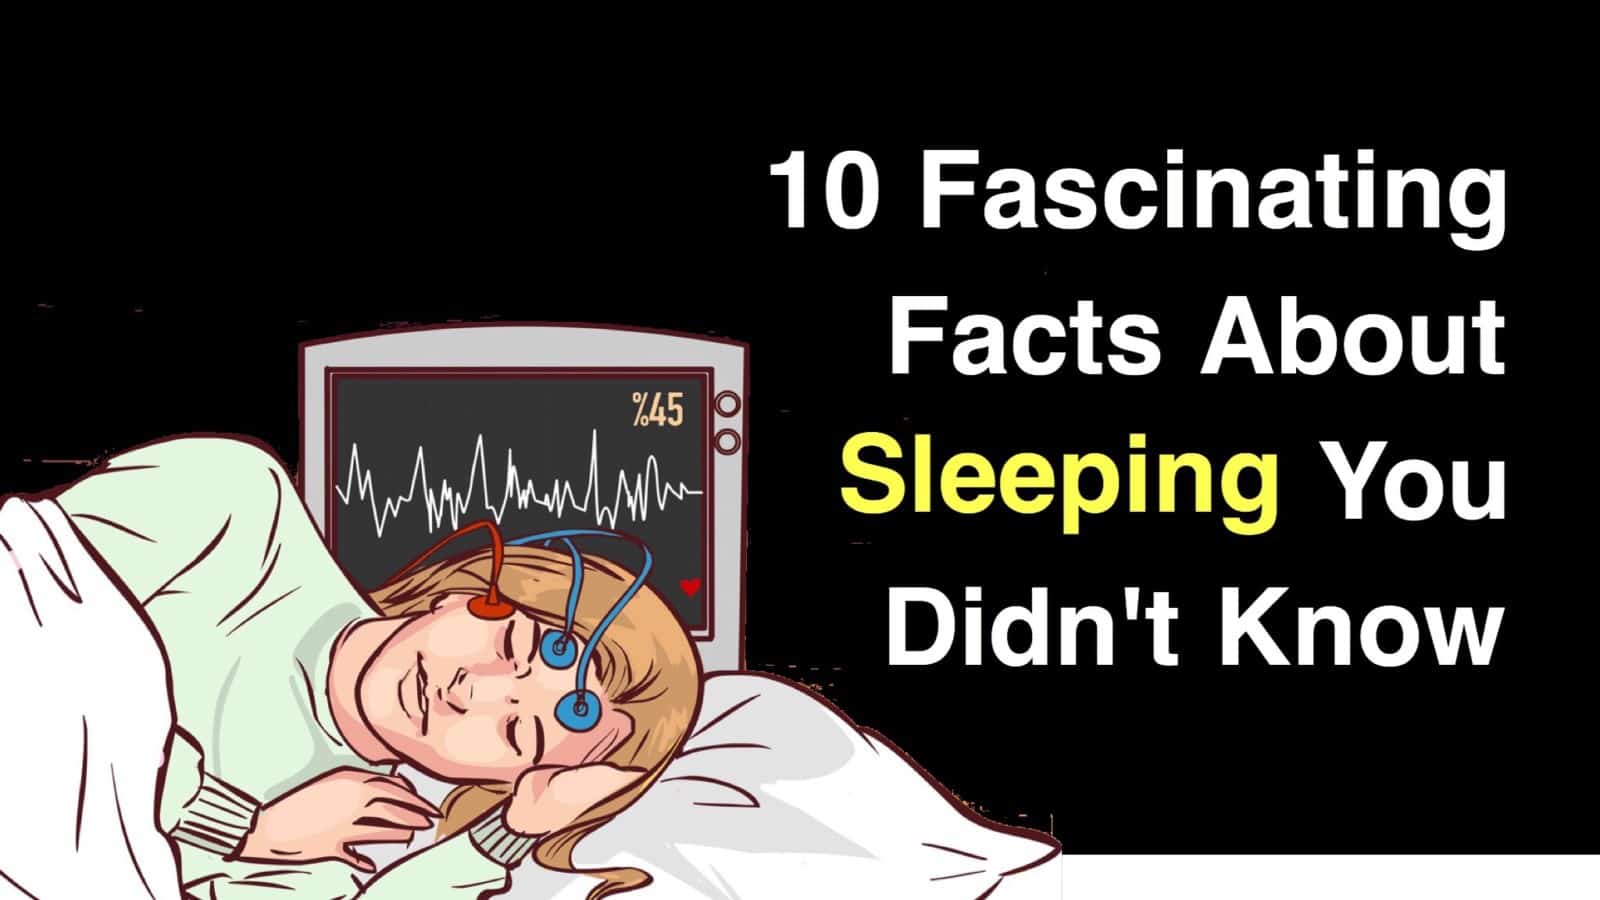 10 Fascinating Facts About Sleeping You Didn’t Know